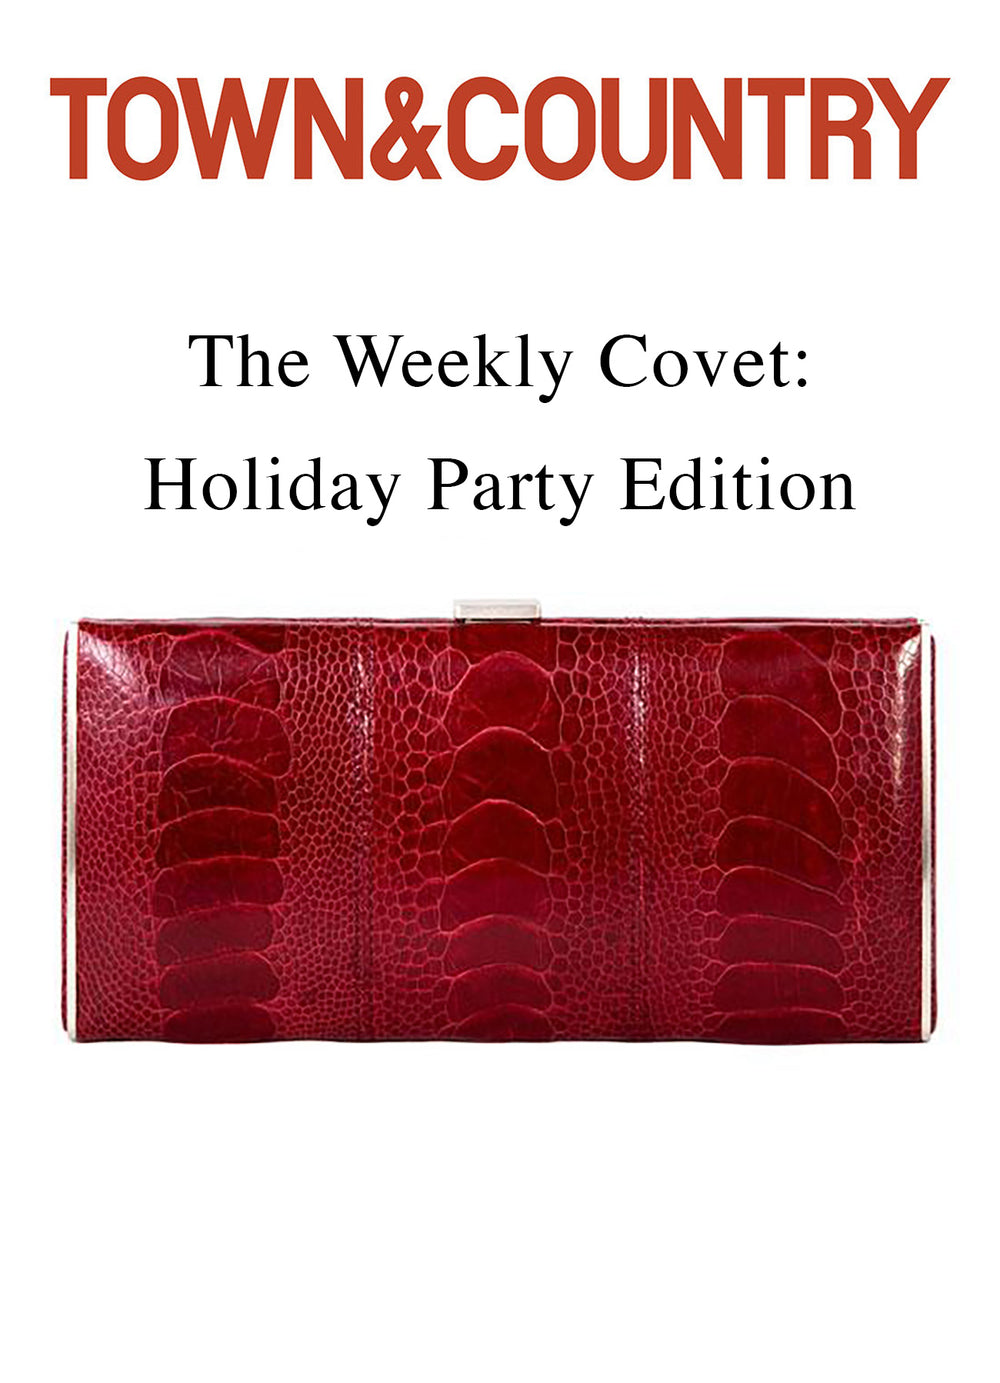 Darby Scott red wallet under Town and Country logo as featured in Holiday Gift guide on town&country.com website